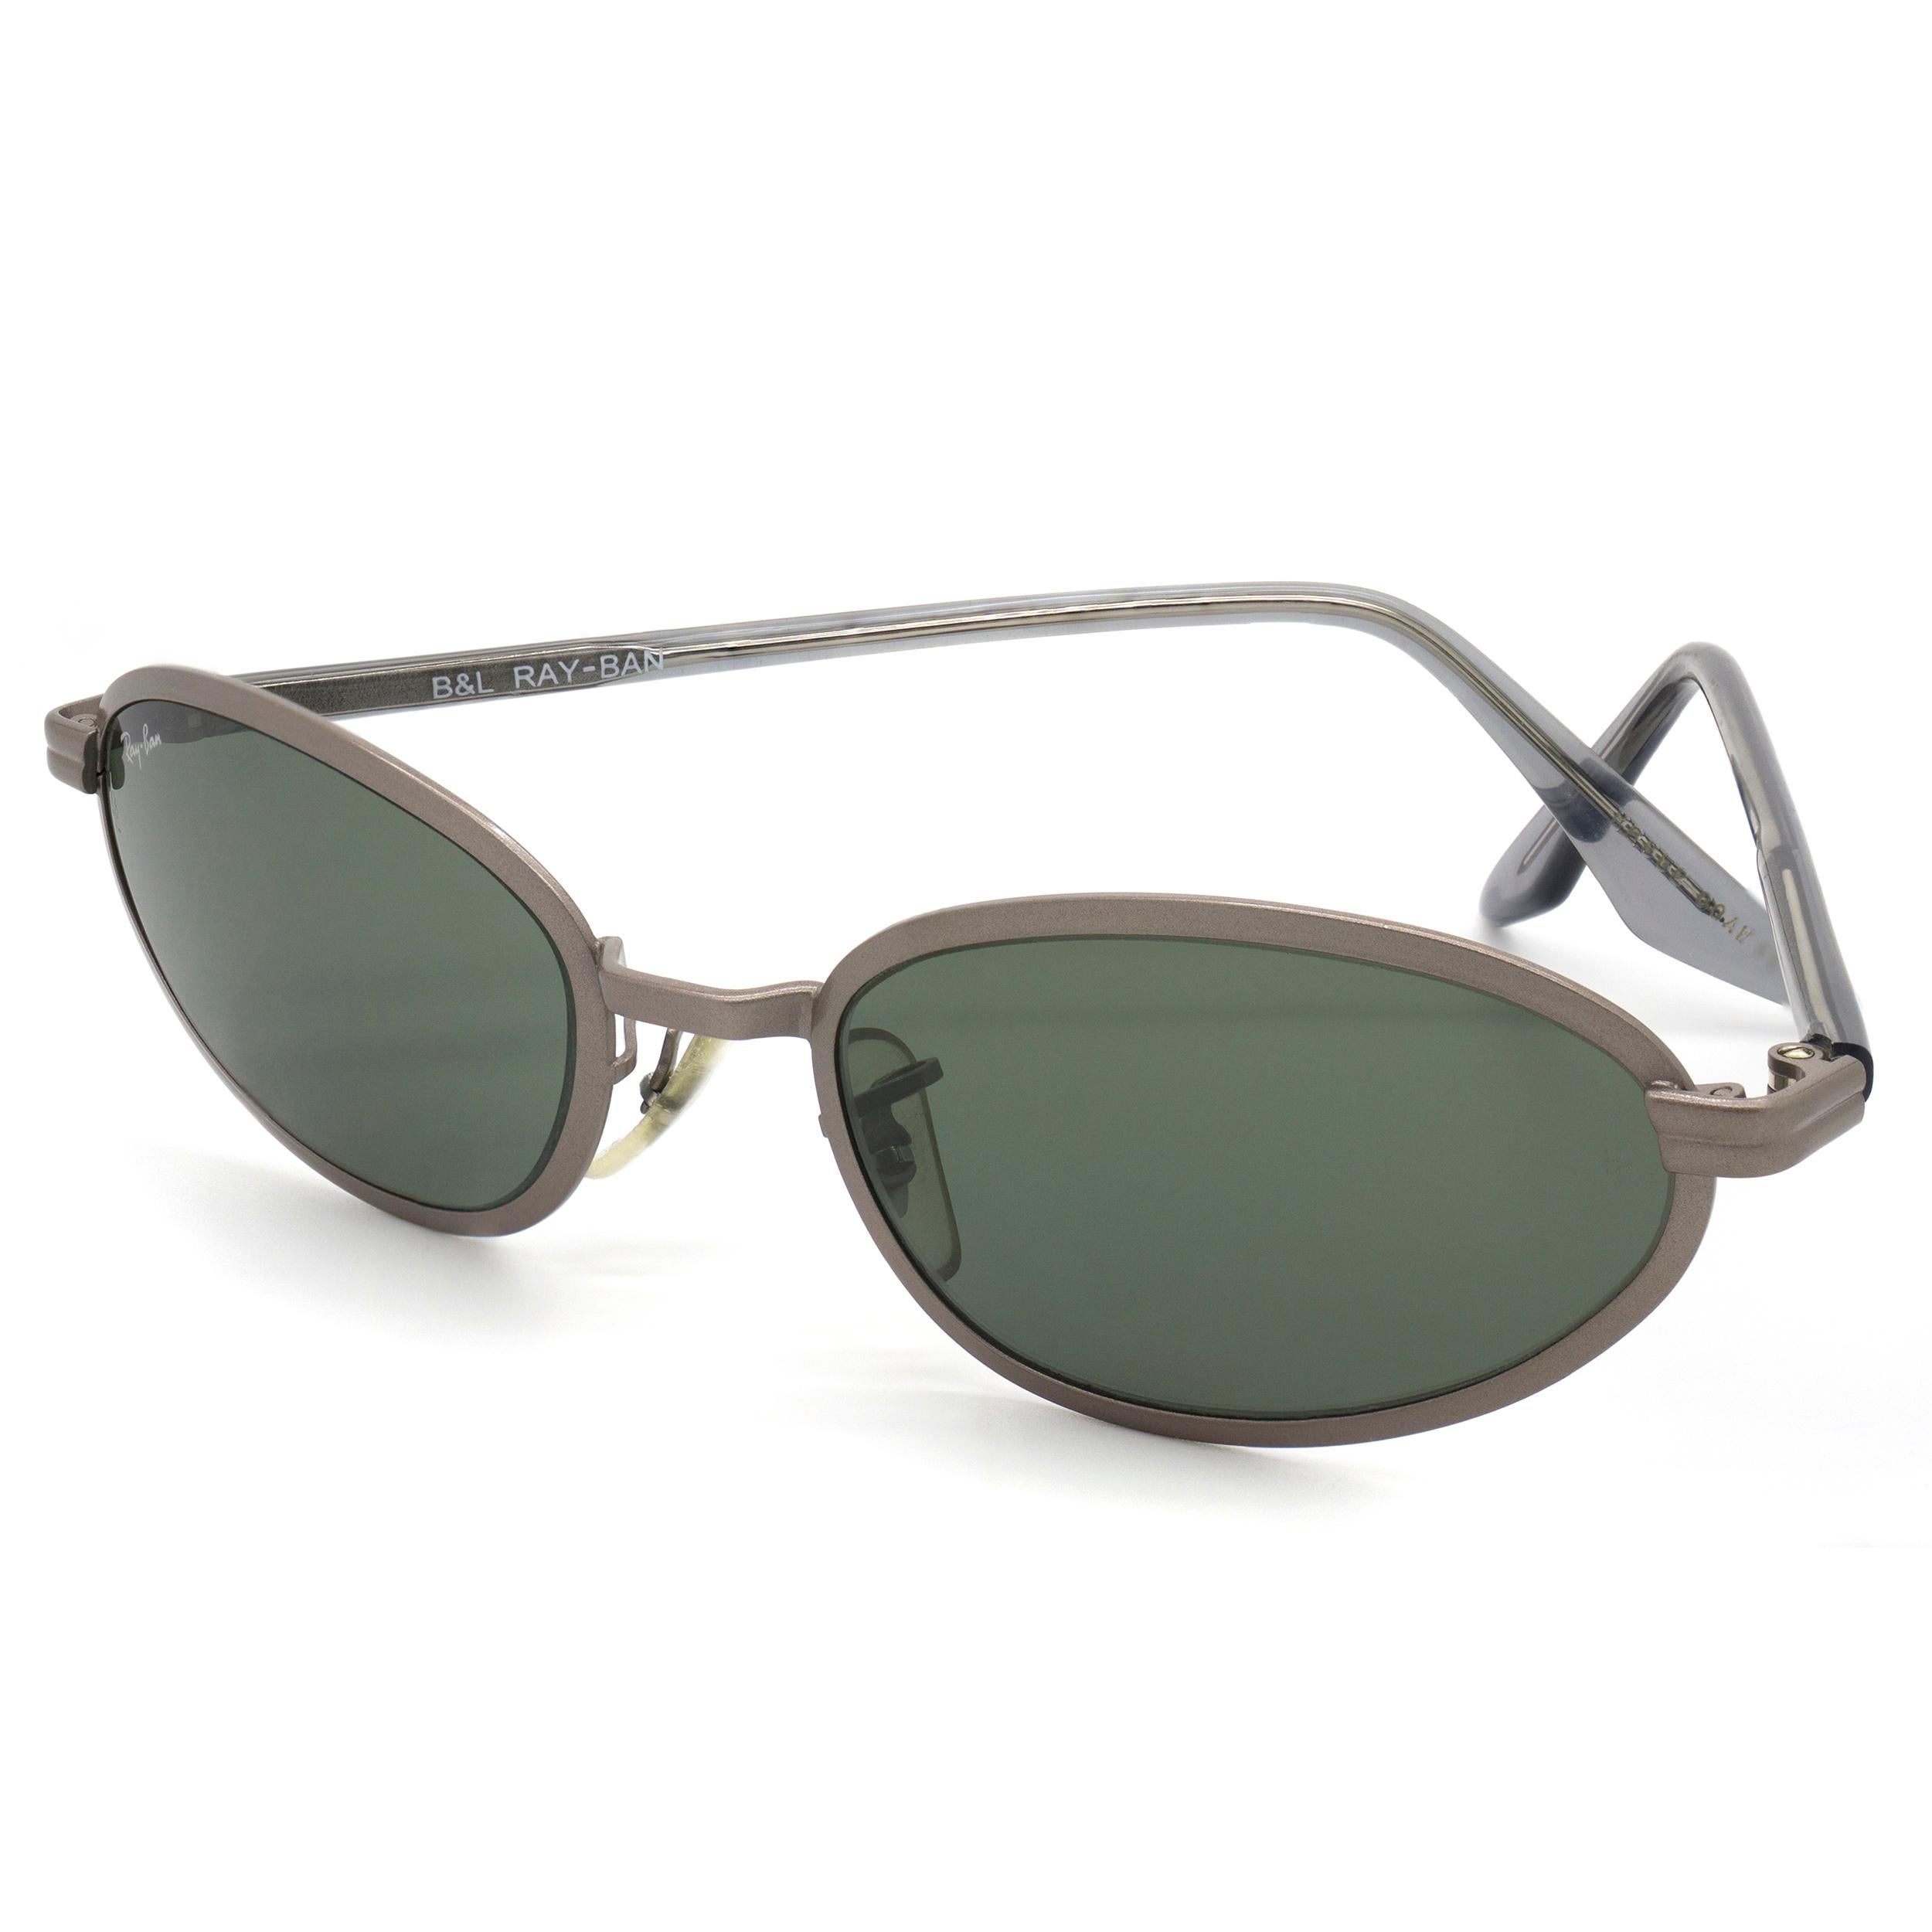 ray-ban bausch & lomb vintage